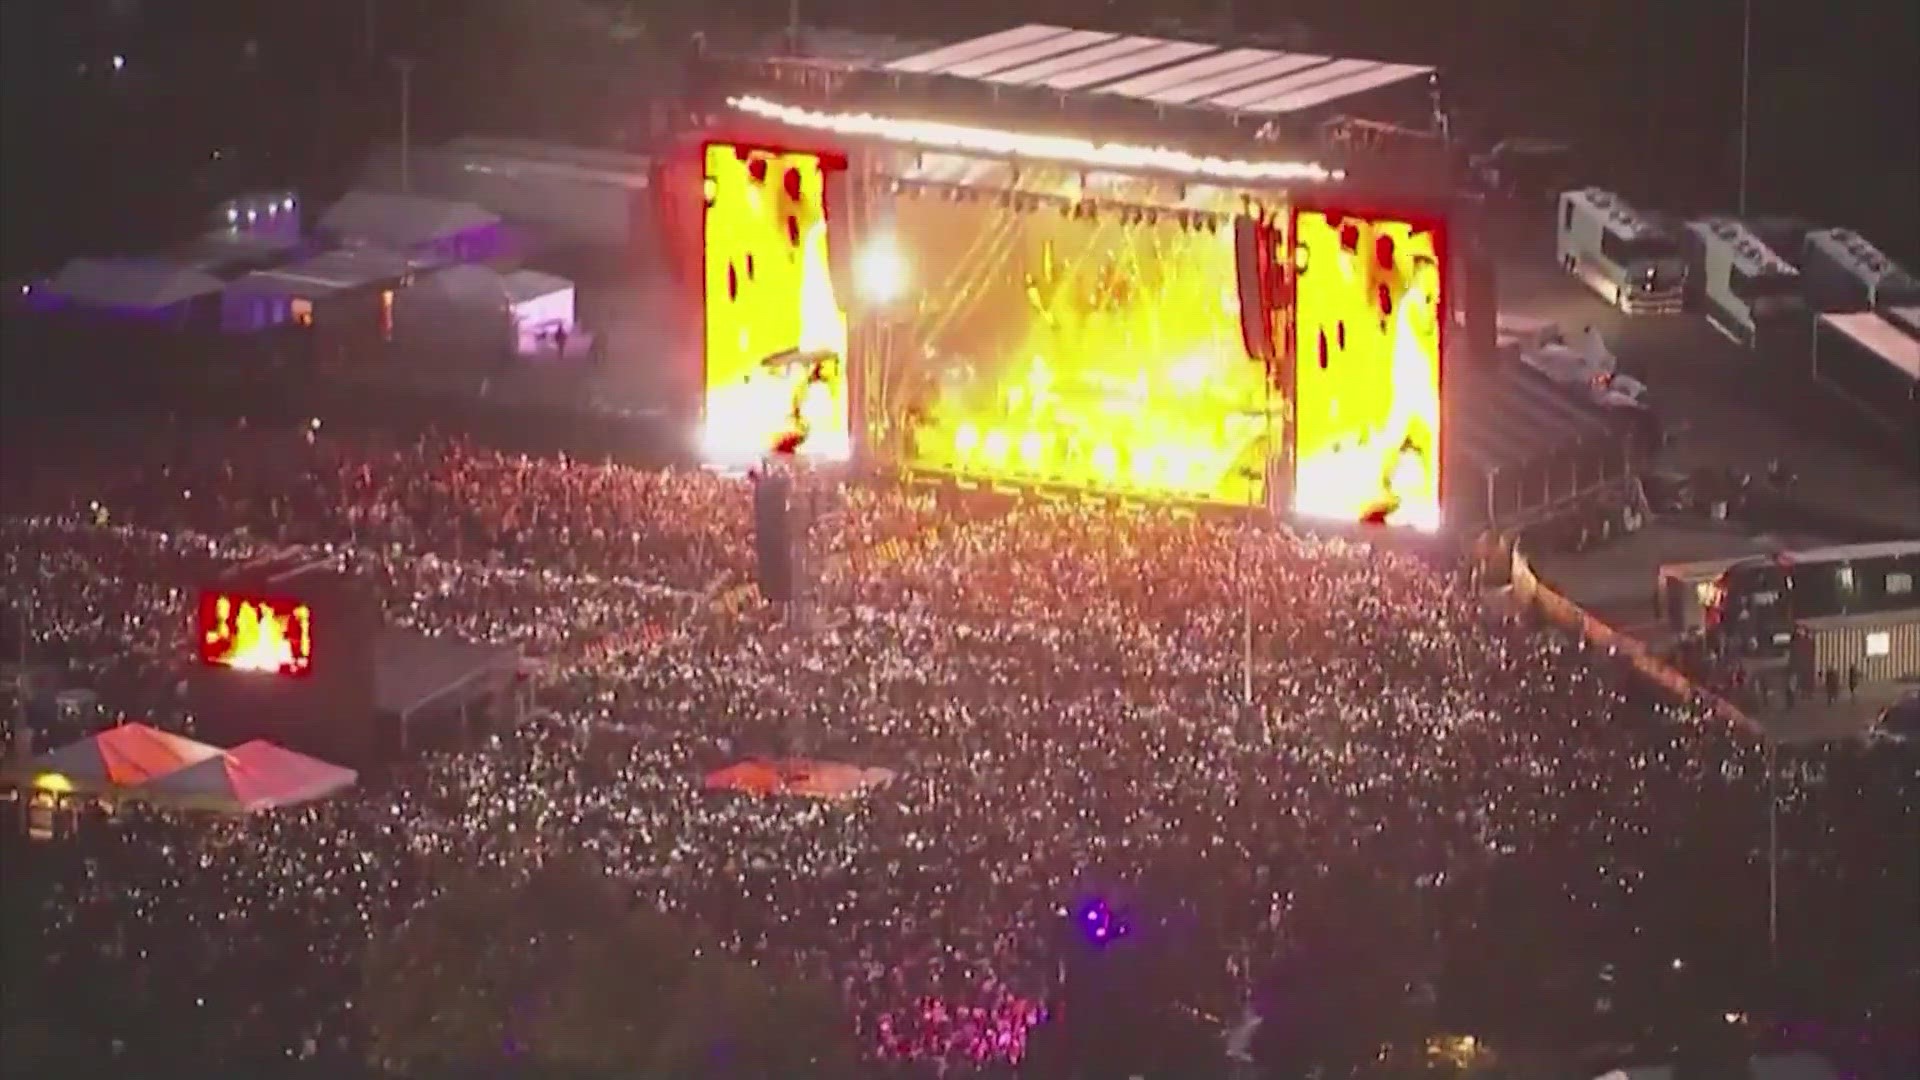 Ten people, including a 9-year-old boy, died after being crushed during the 2021 Astroworld Festival at NRG Park in Houston.